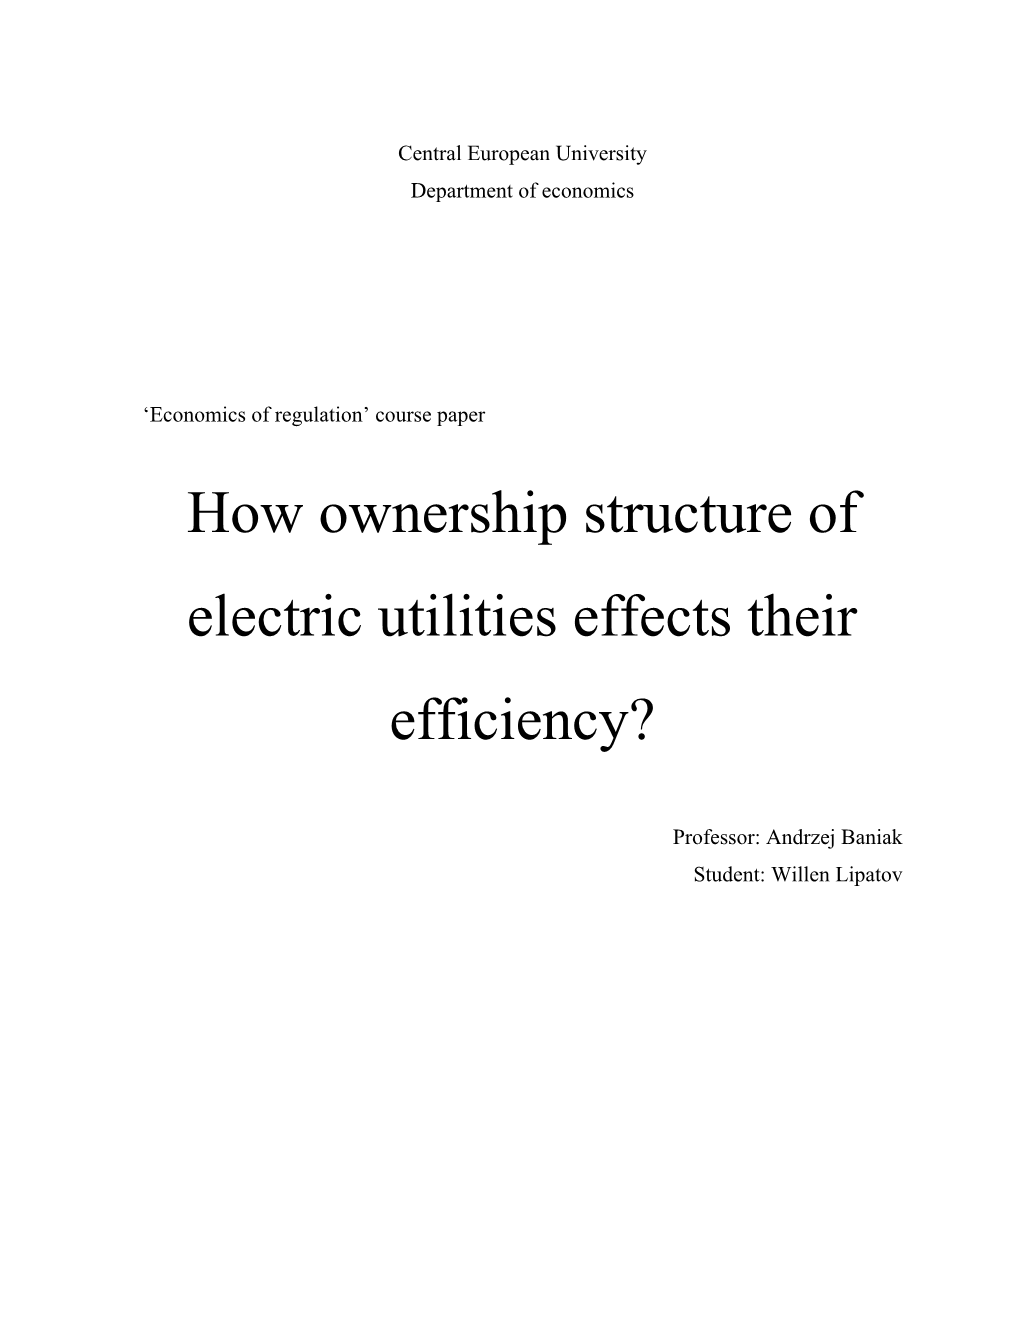 How Ownership Structure of Electric Utilities Effects Their Efficiency